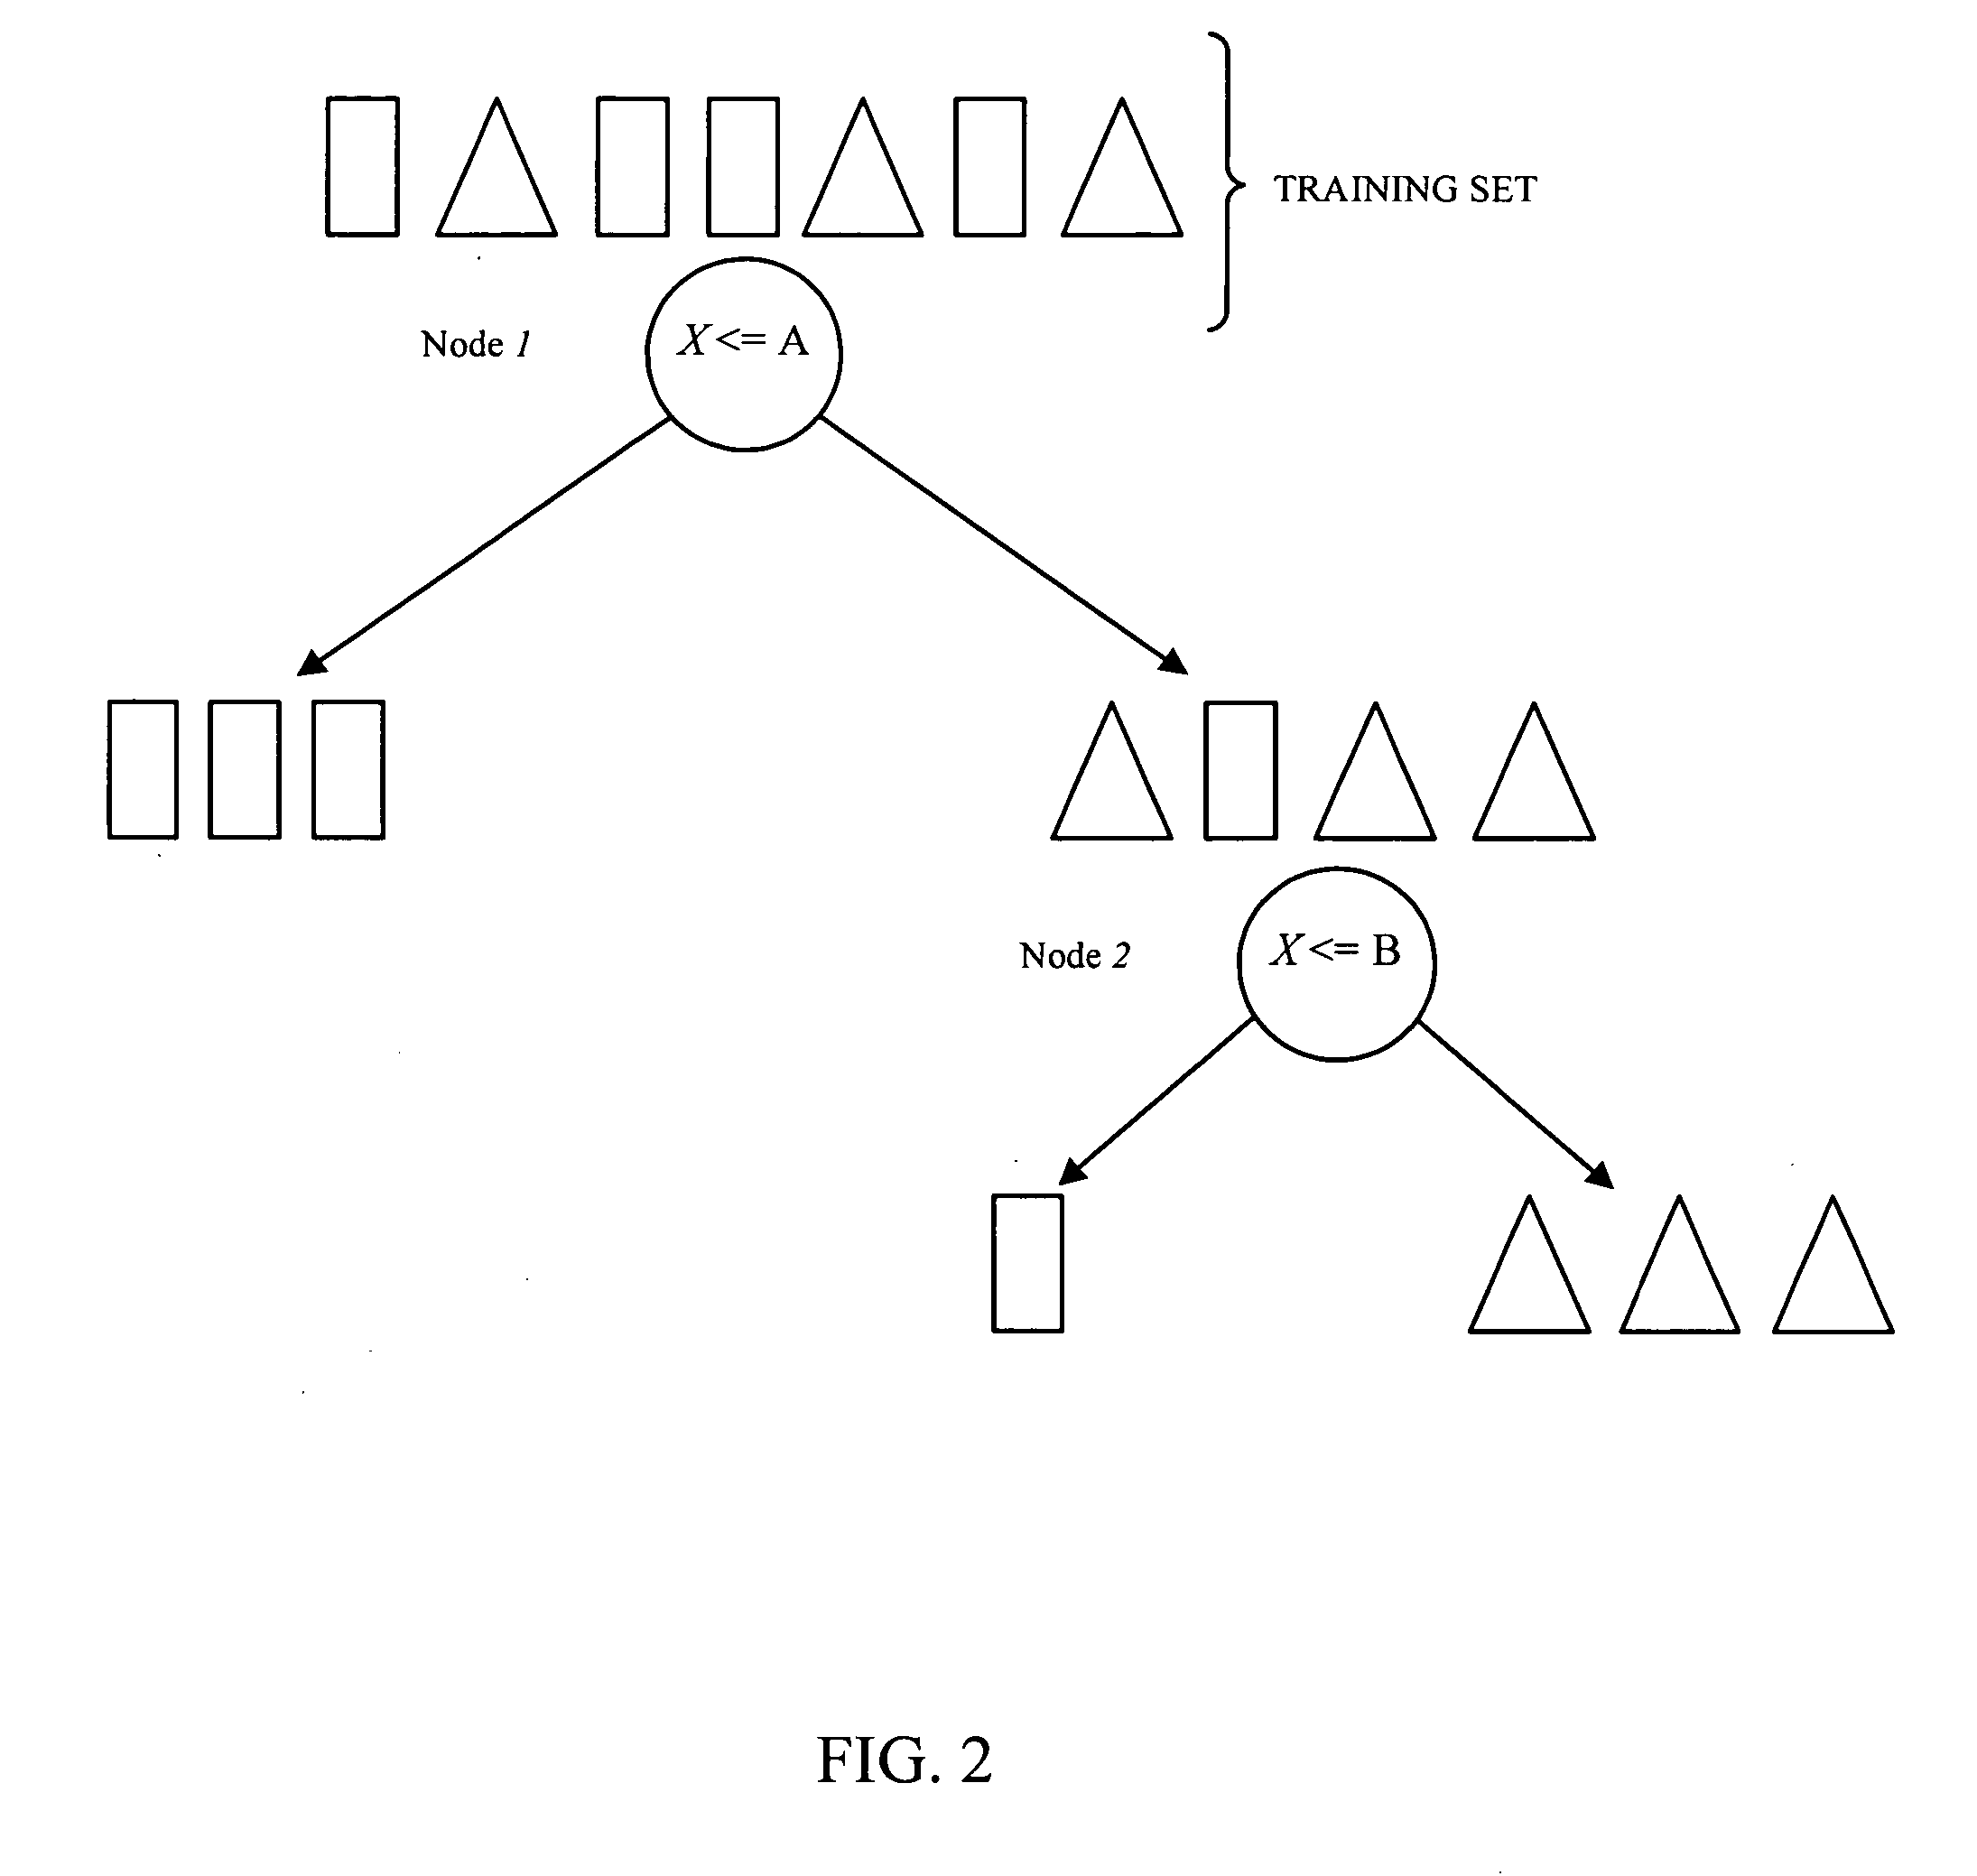 System and method for word-sense disambiguation by recursive partitioning